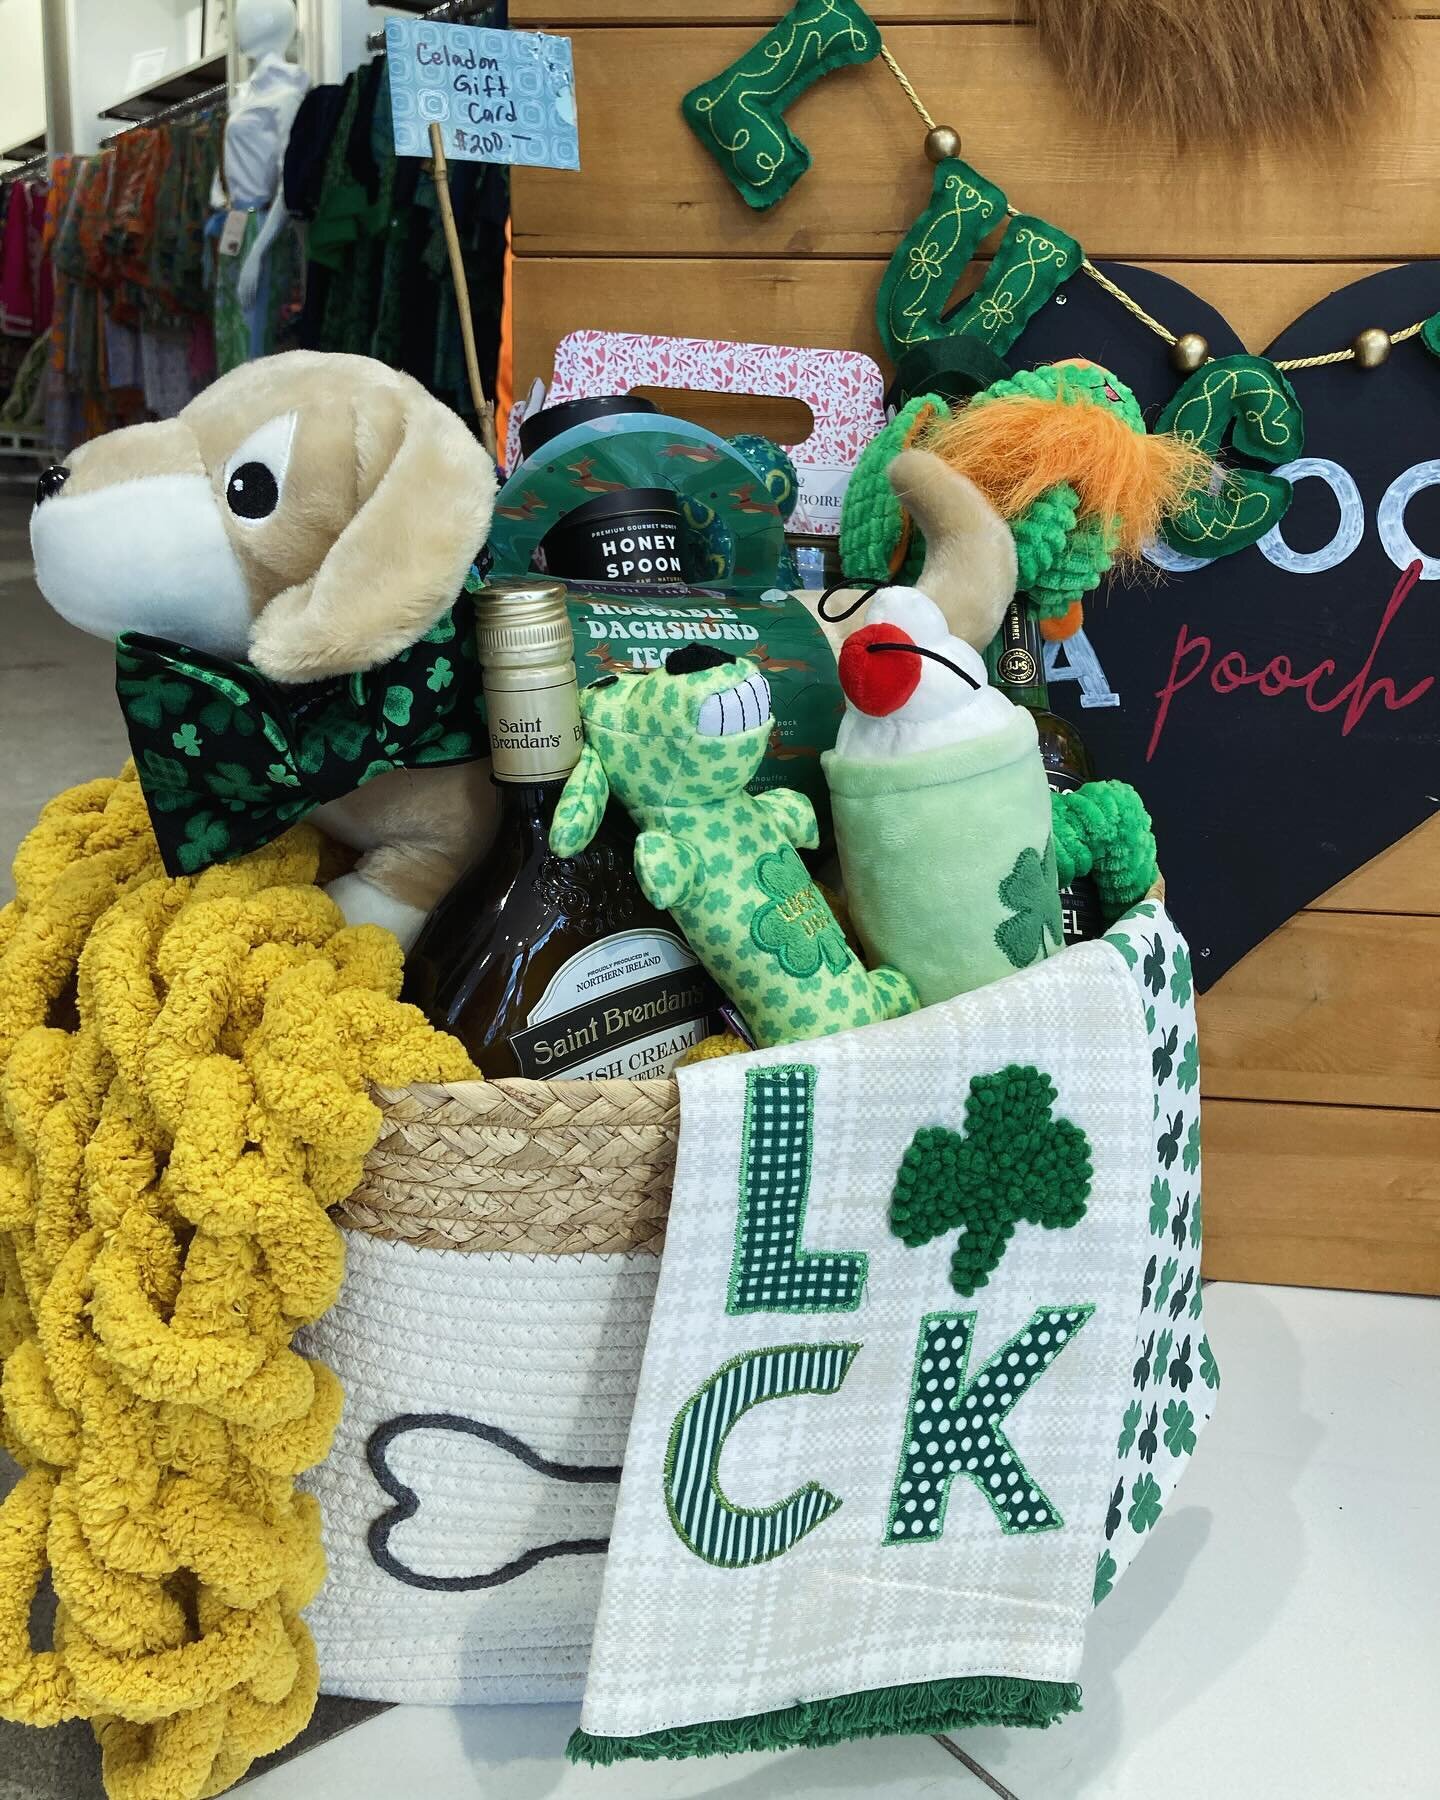 Feeling the luck of the Irish? 
Enter to win our St Paddy&rsquo;s Day Raffle Basket!

What&rsquo;s included: $450 Value
$50 Woven Rope Basket 🧺 
$200 Celadon gift card 
$39 Irish Cream Liqueur
$30 Jameson Whiskey 🥃 
$40 Chunky Knit Blanket
$10 Hone